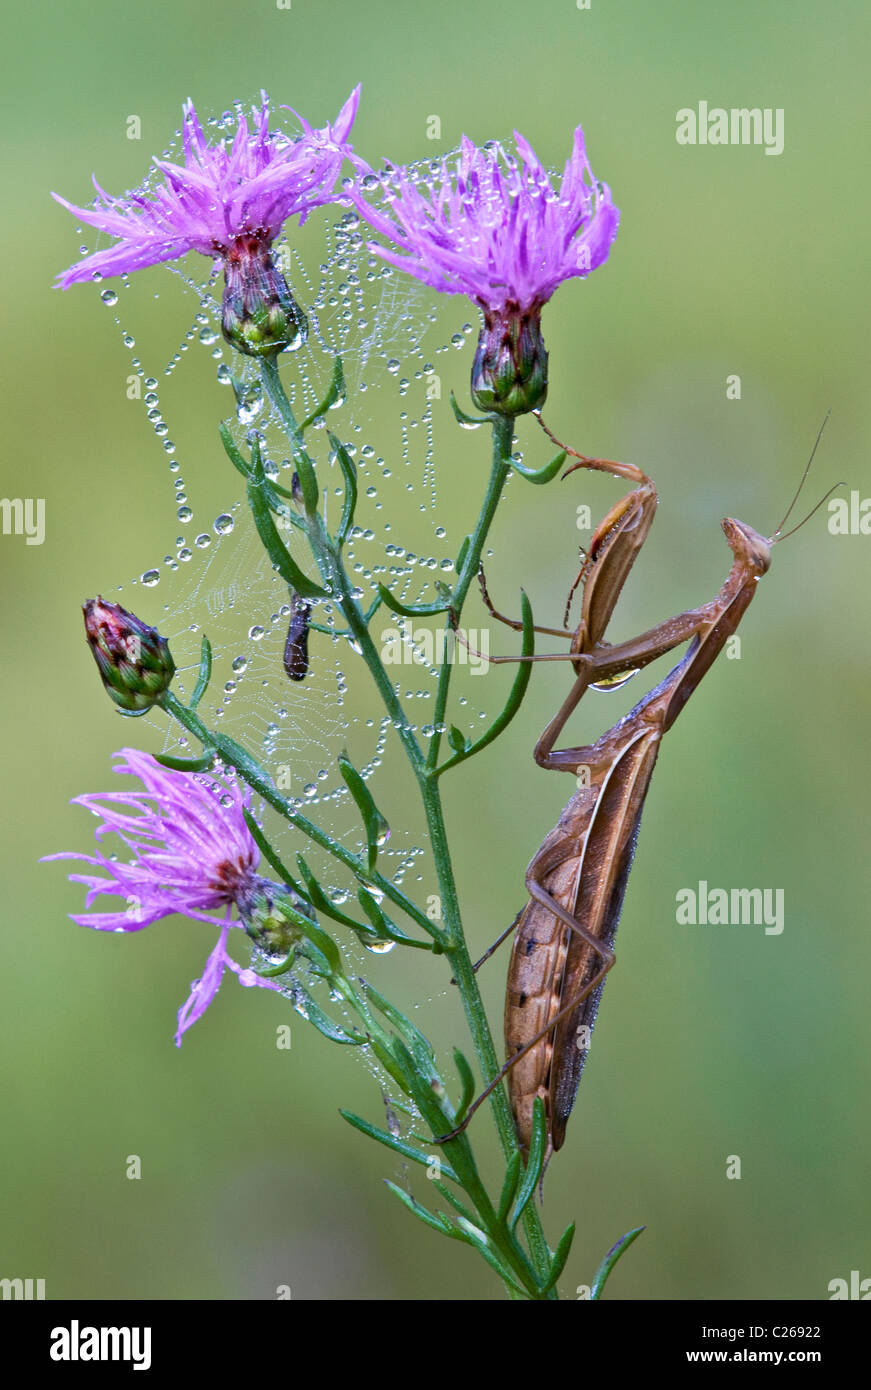 Chinese Praying Mantis Tenodera sinensis perched on dewy Spotted Knapweed Centaurea maculosa Eastern USA Stock Photo